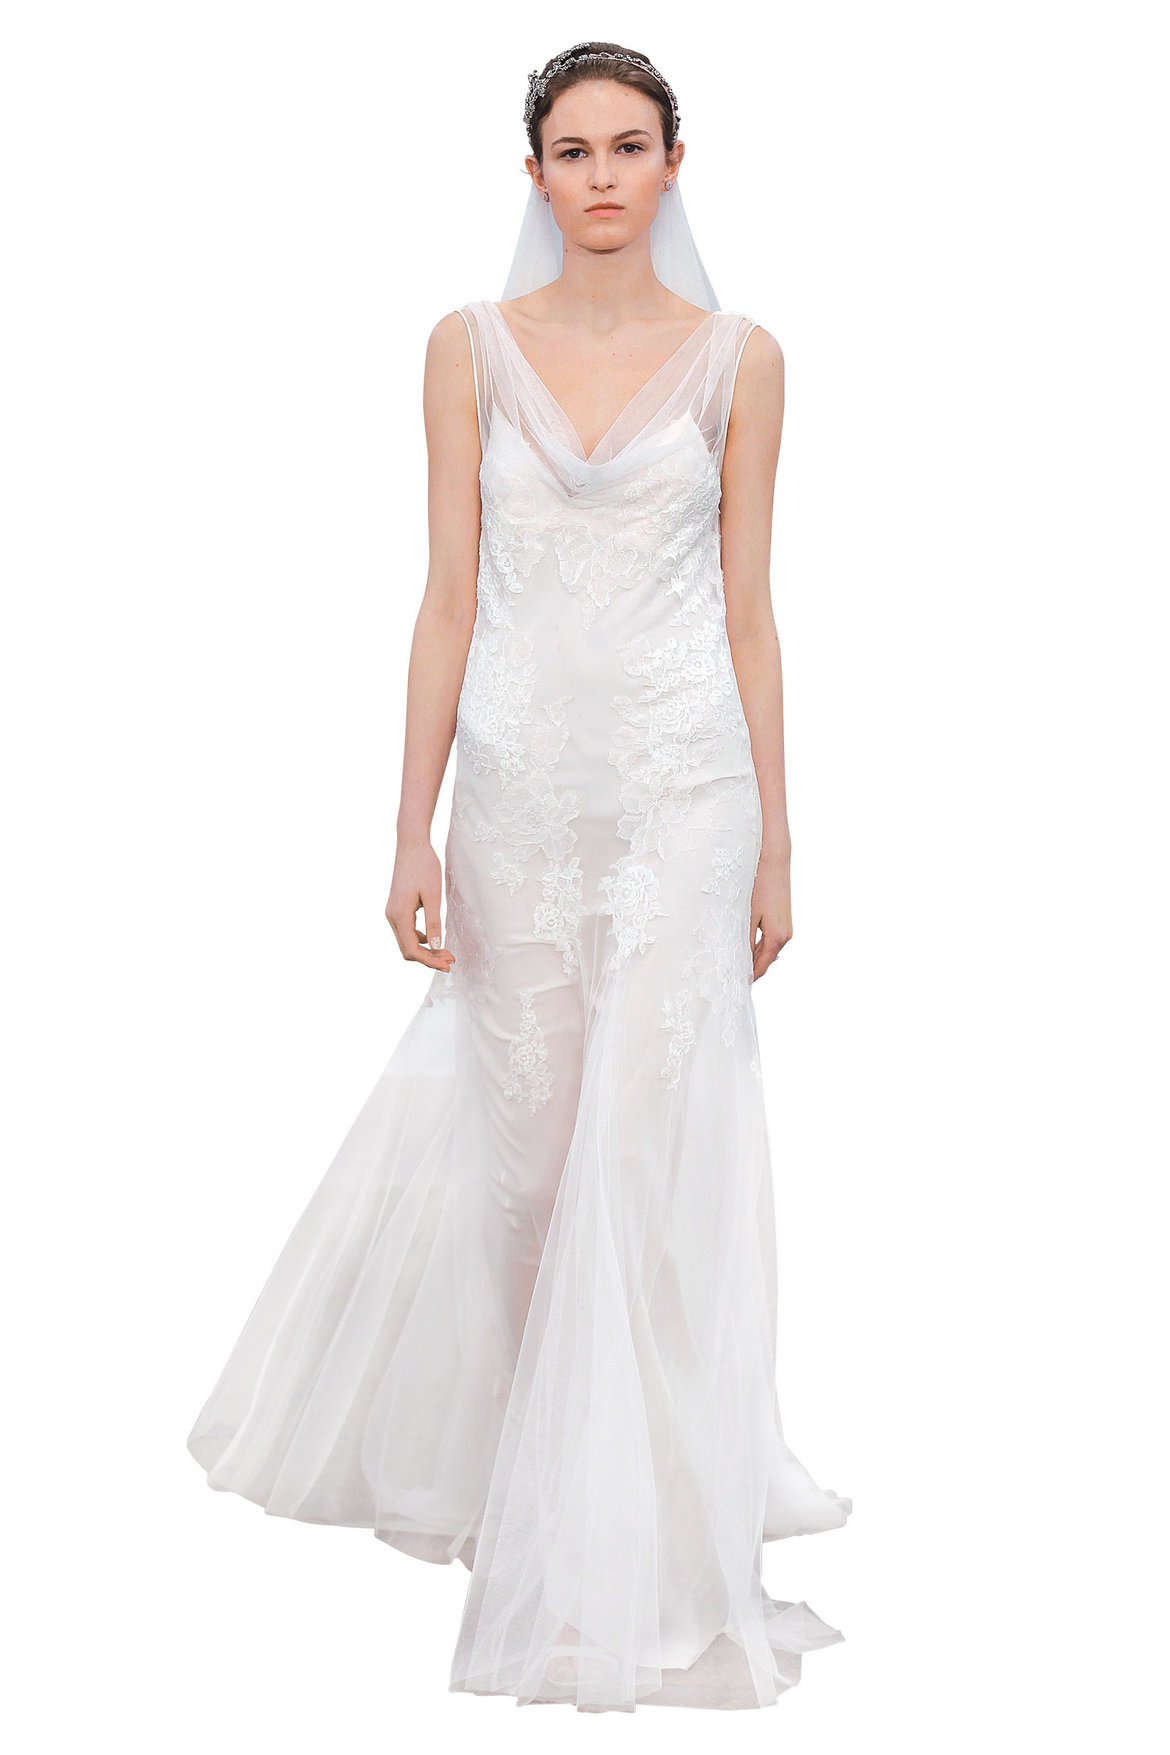 Best Wedding Dress for Your Body Type  BridalGuide